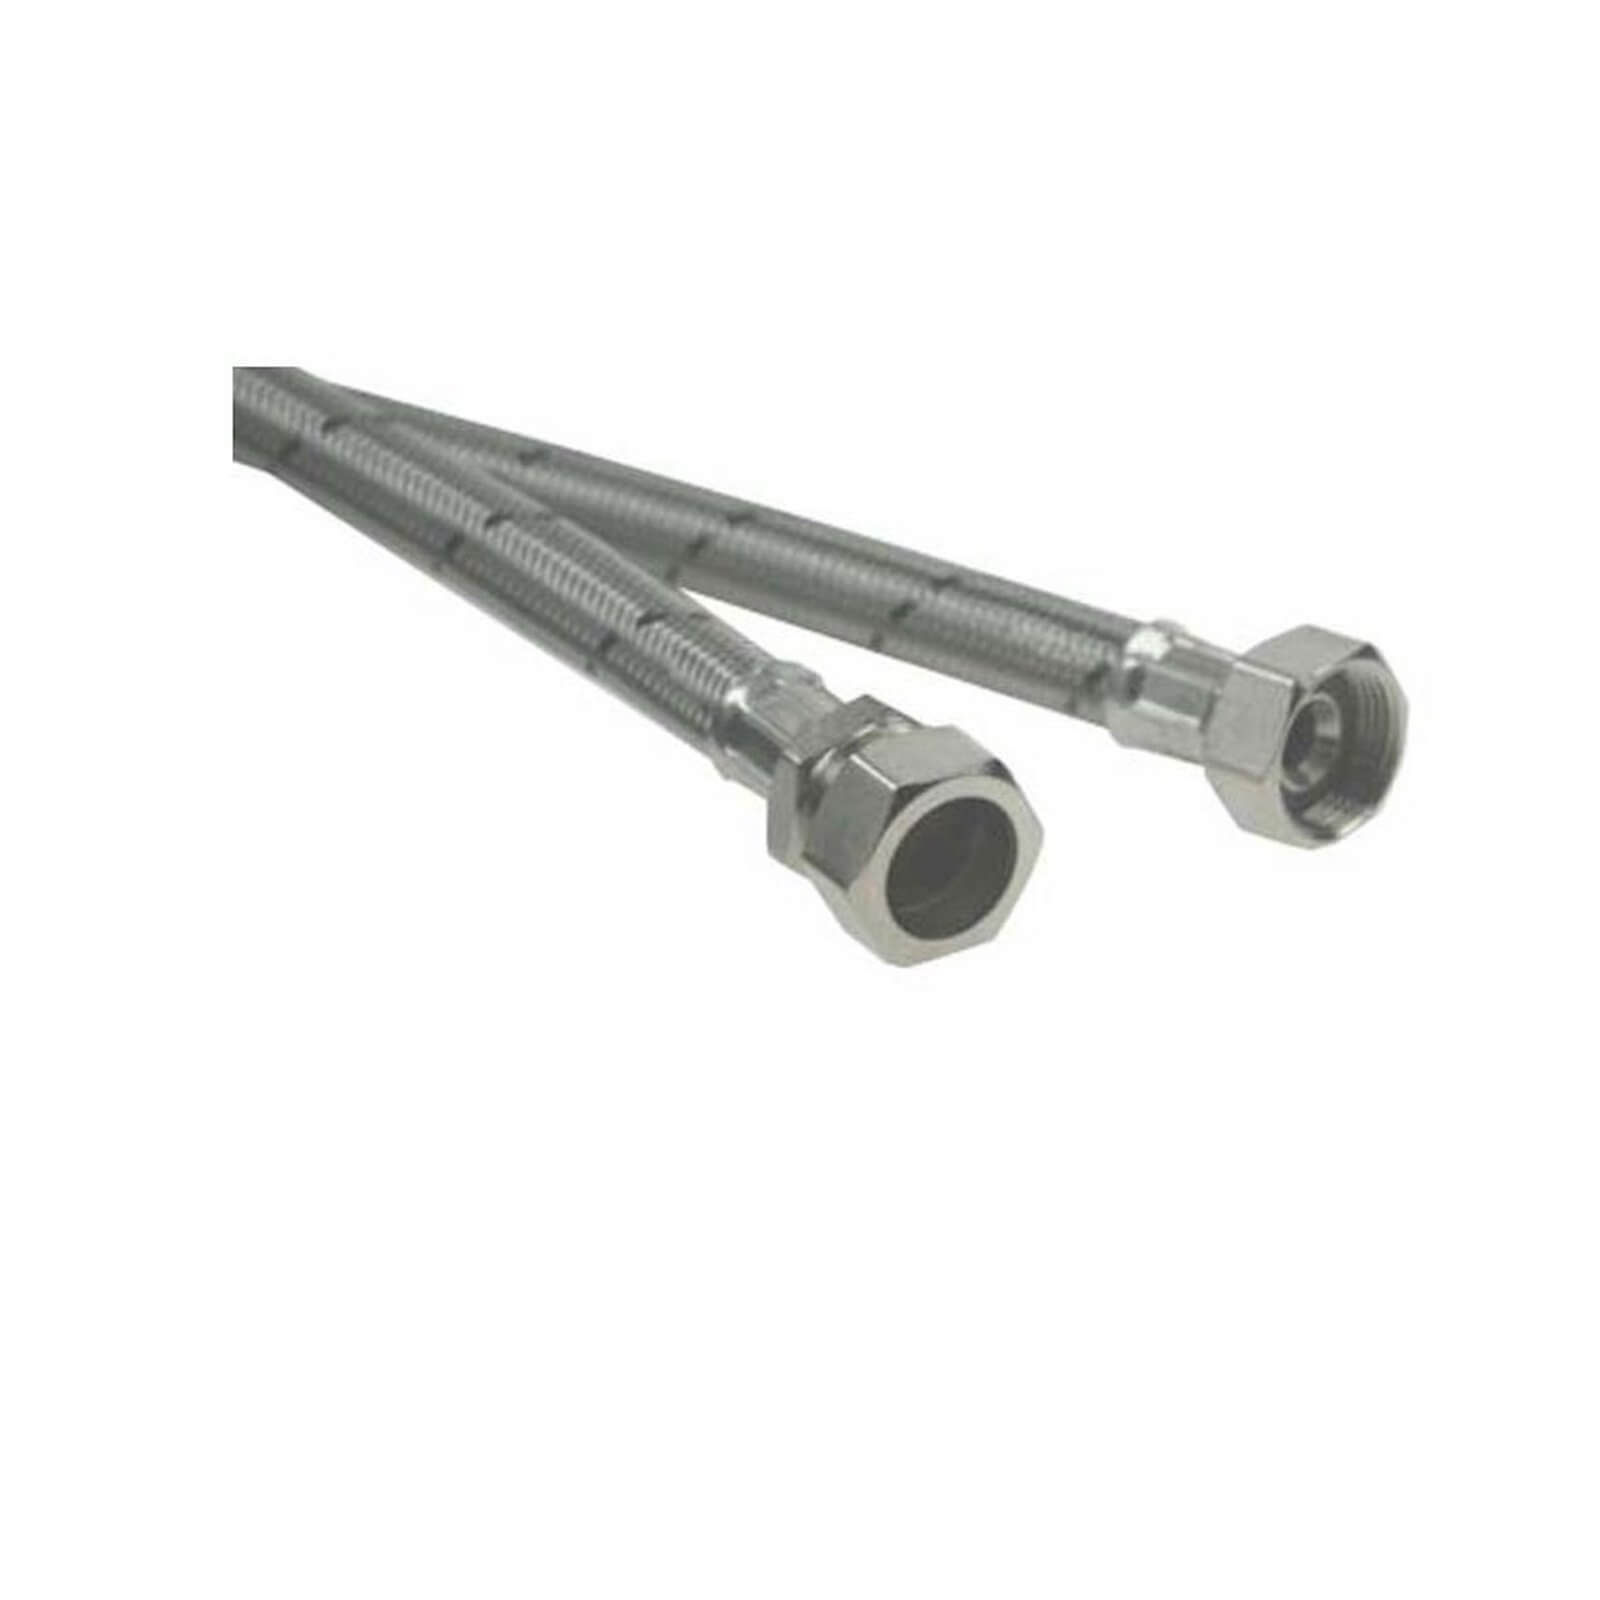 Photo of Compression Braided Tap Connector - 15x300mm - 0.75in